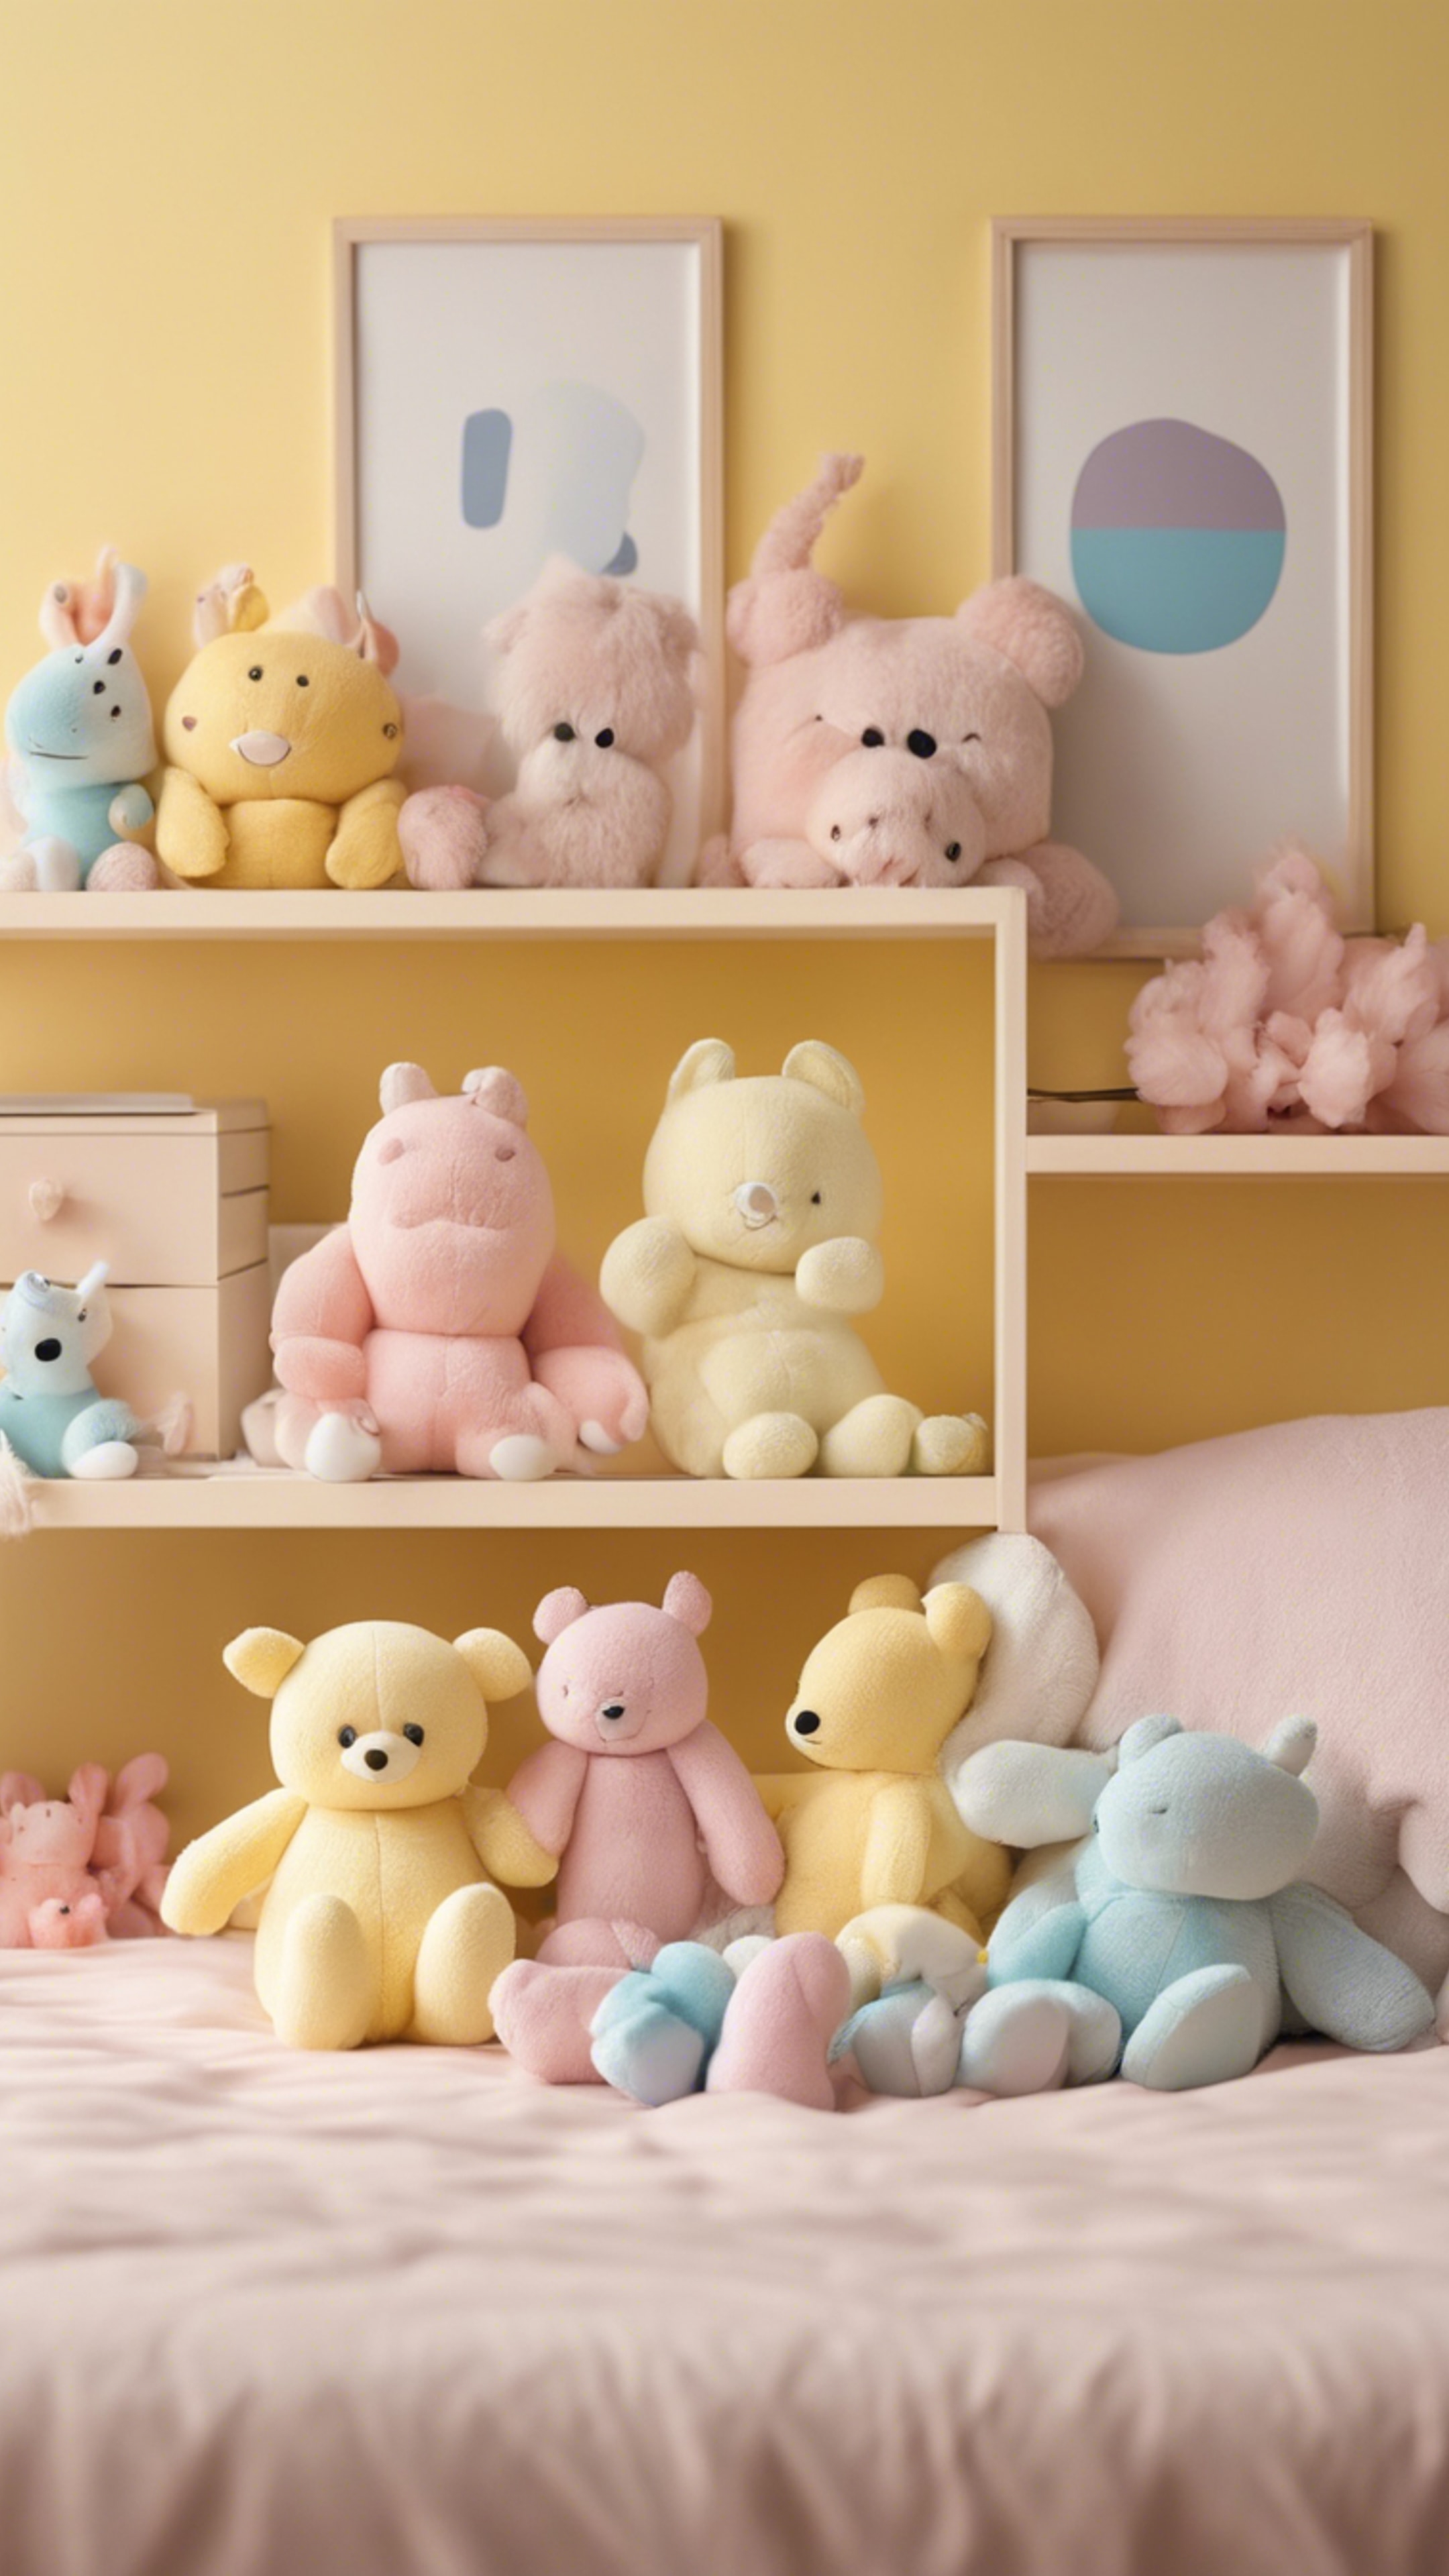 Tidy bedroom with pastel yellow walls decorated with kawaii plush toys. Tapet[bea5098546c74f3e98b3]